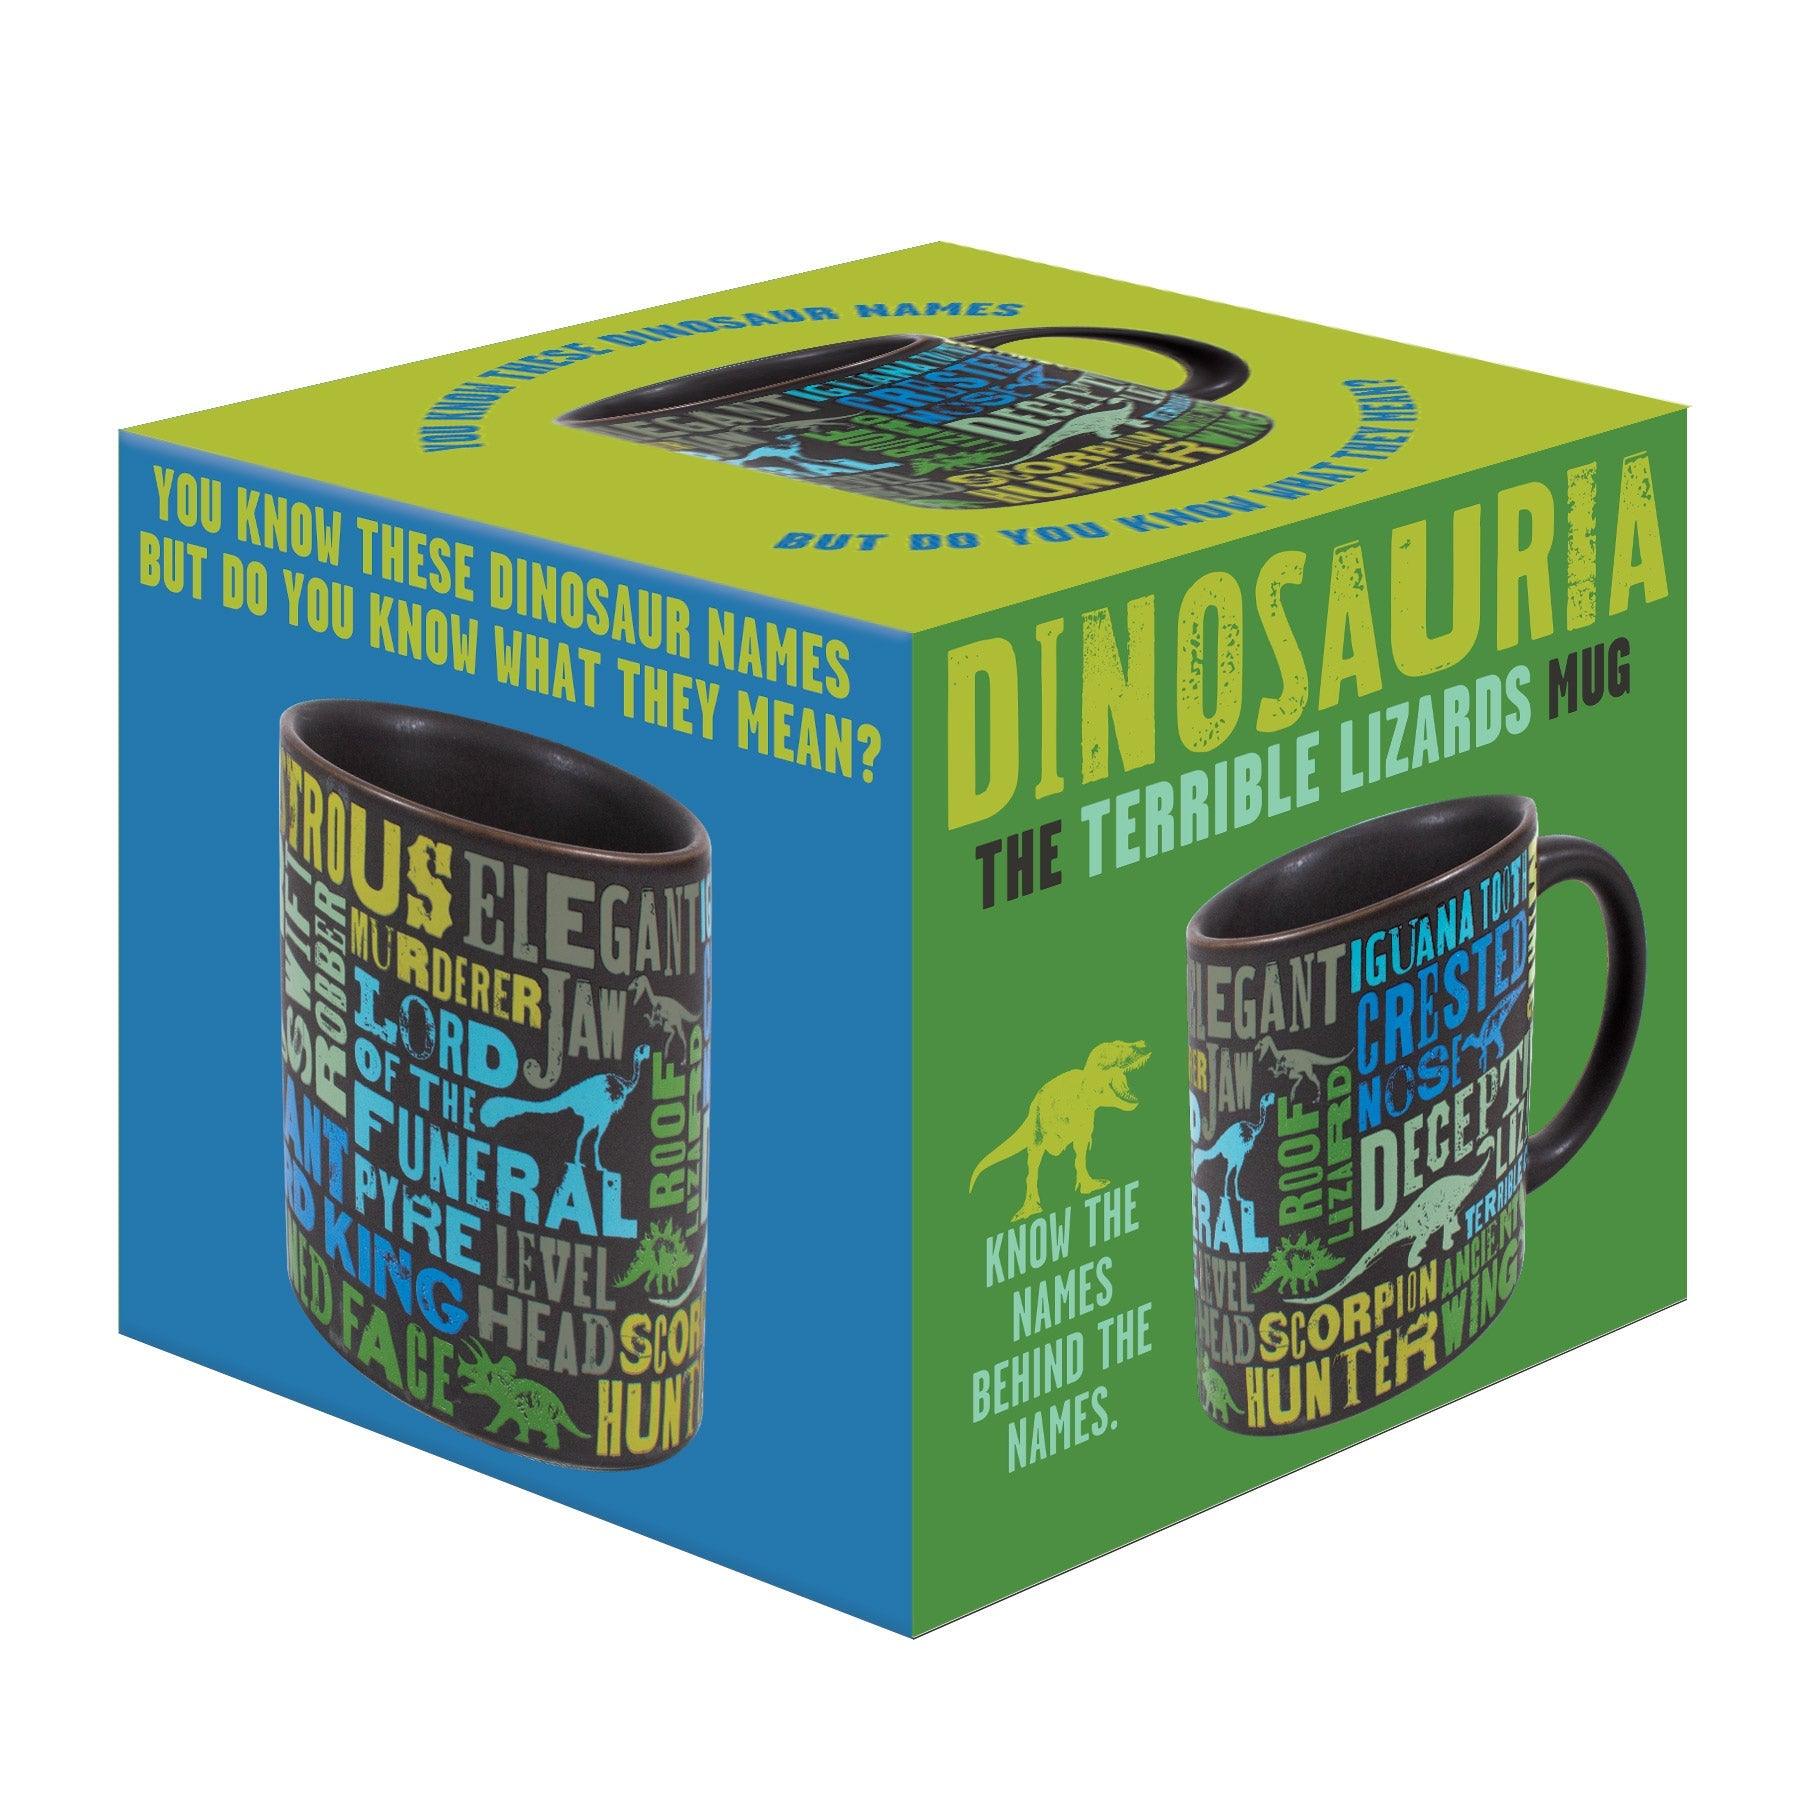 Product photo of Dinosauria Terrible Lizards Mug, a novelty gift manufactured by The Unemployed Philosophers Guild.